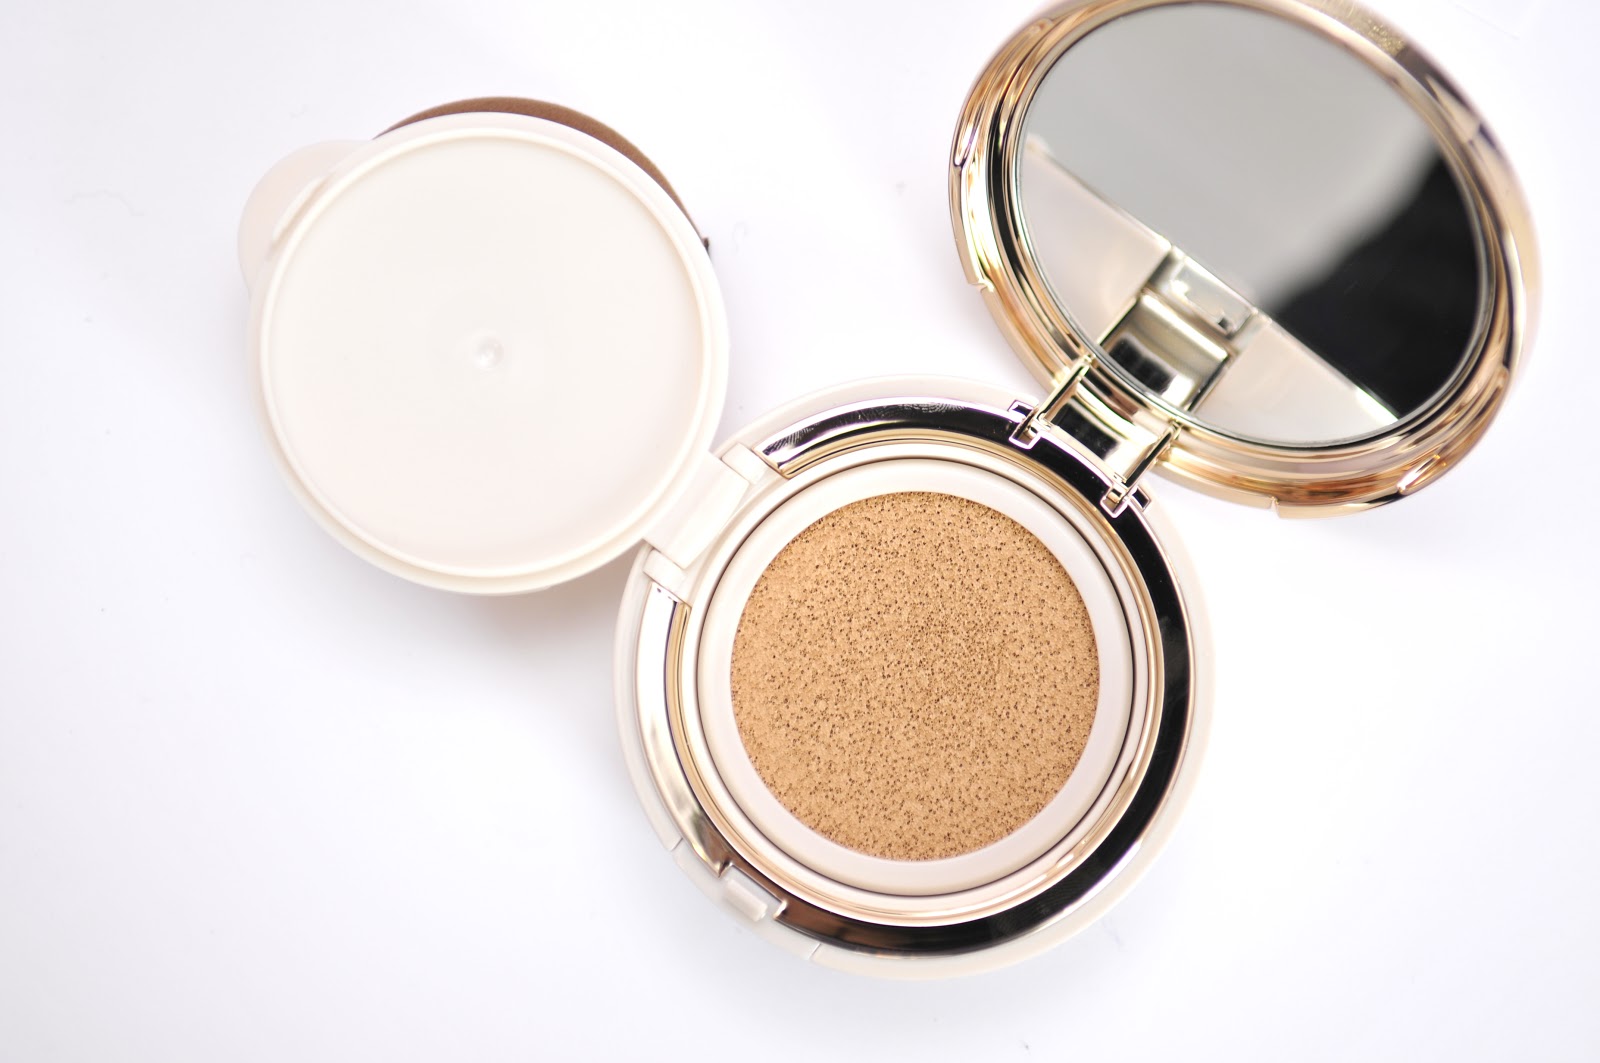 fun size beauty: Sulwhasoo Even Fair Perfecting Cushion Foundation in ...